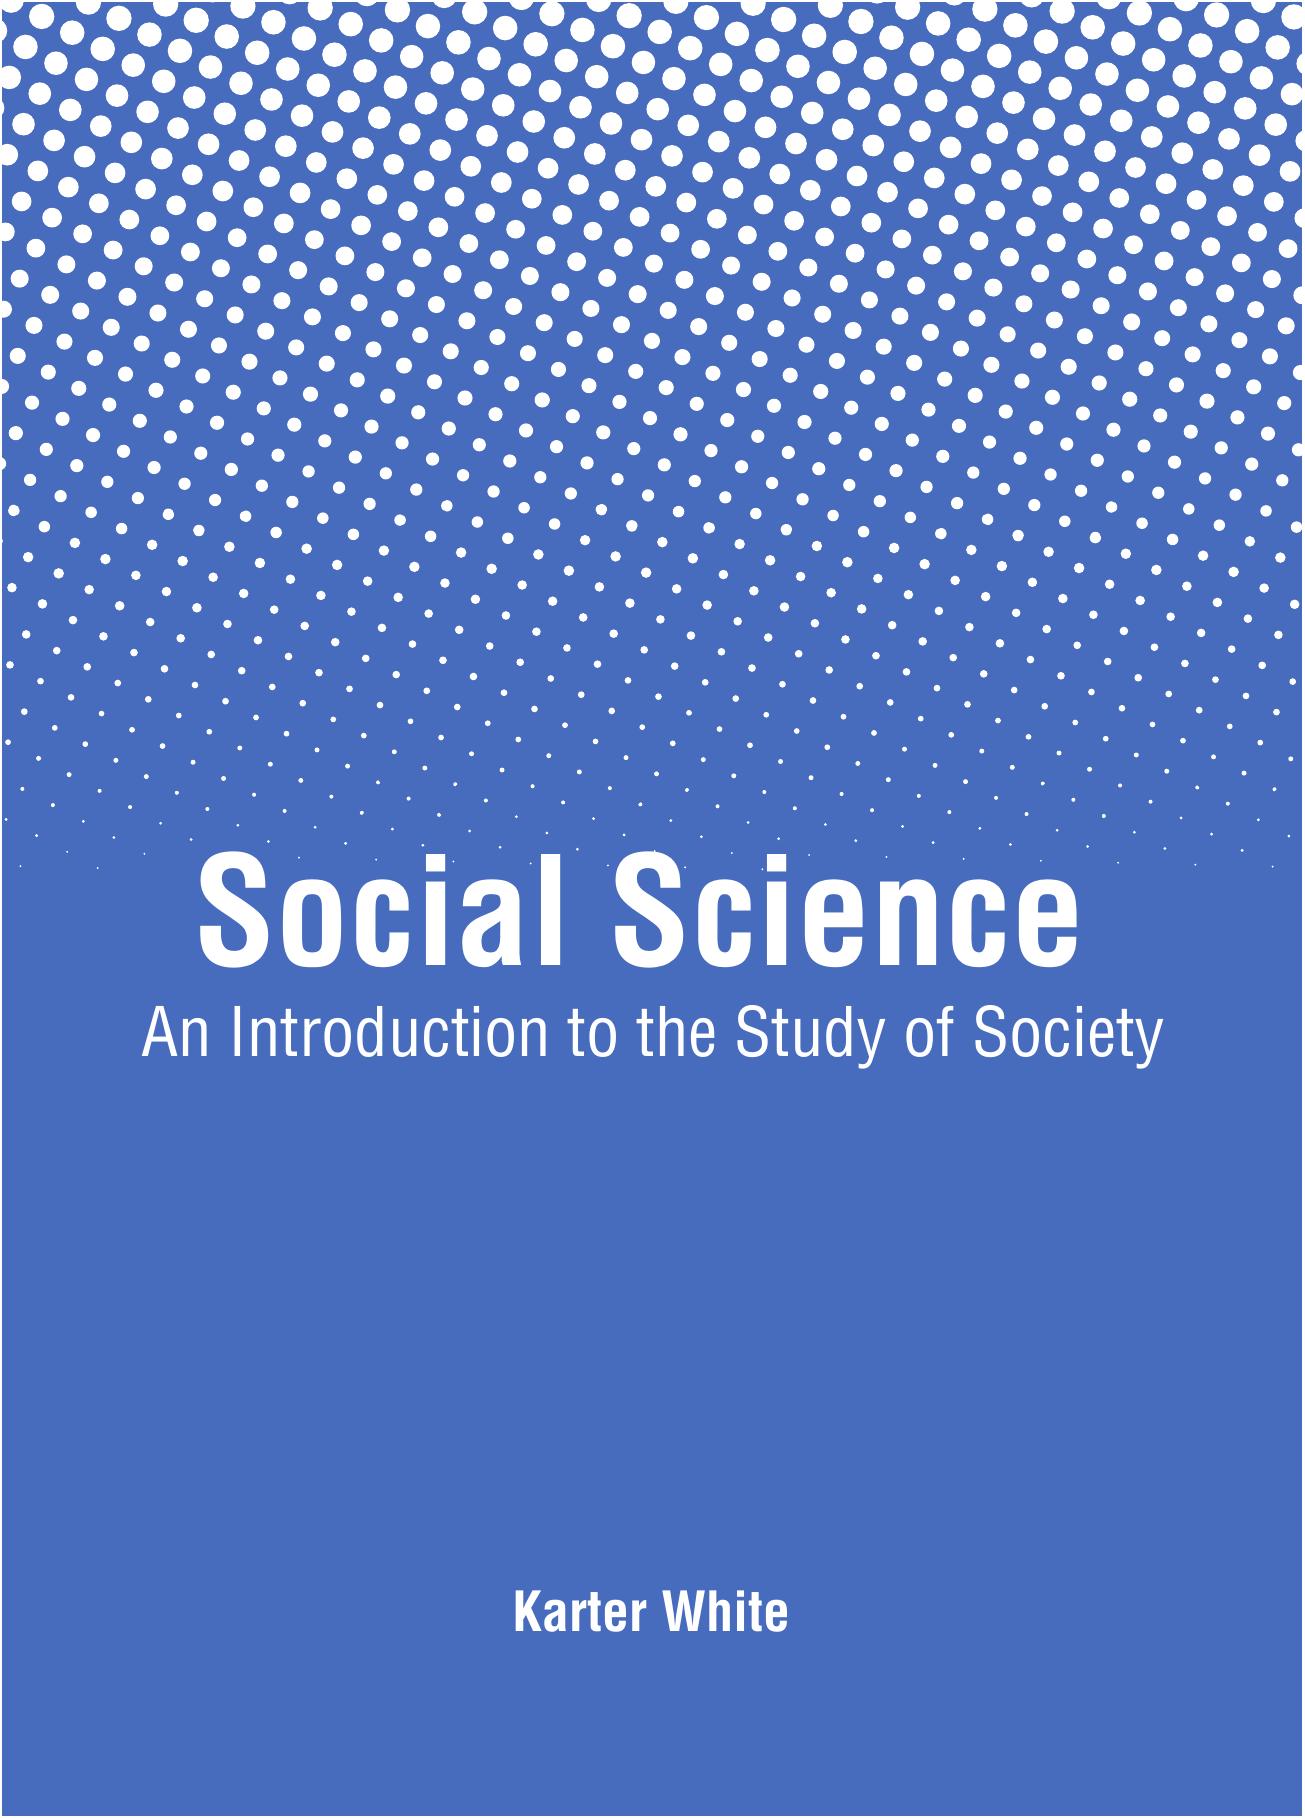 An Introduction to the Study of Society 2016